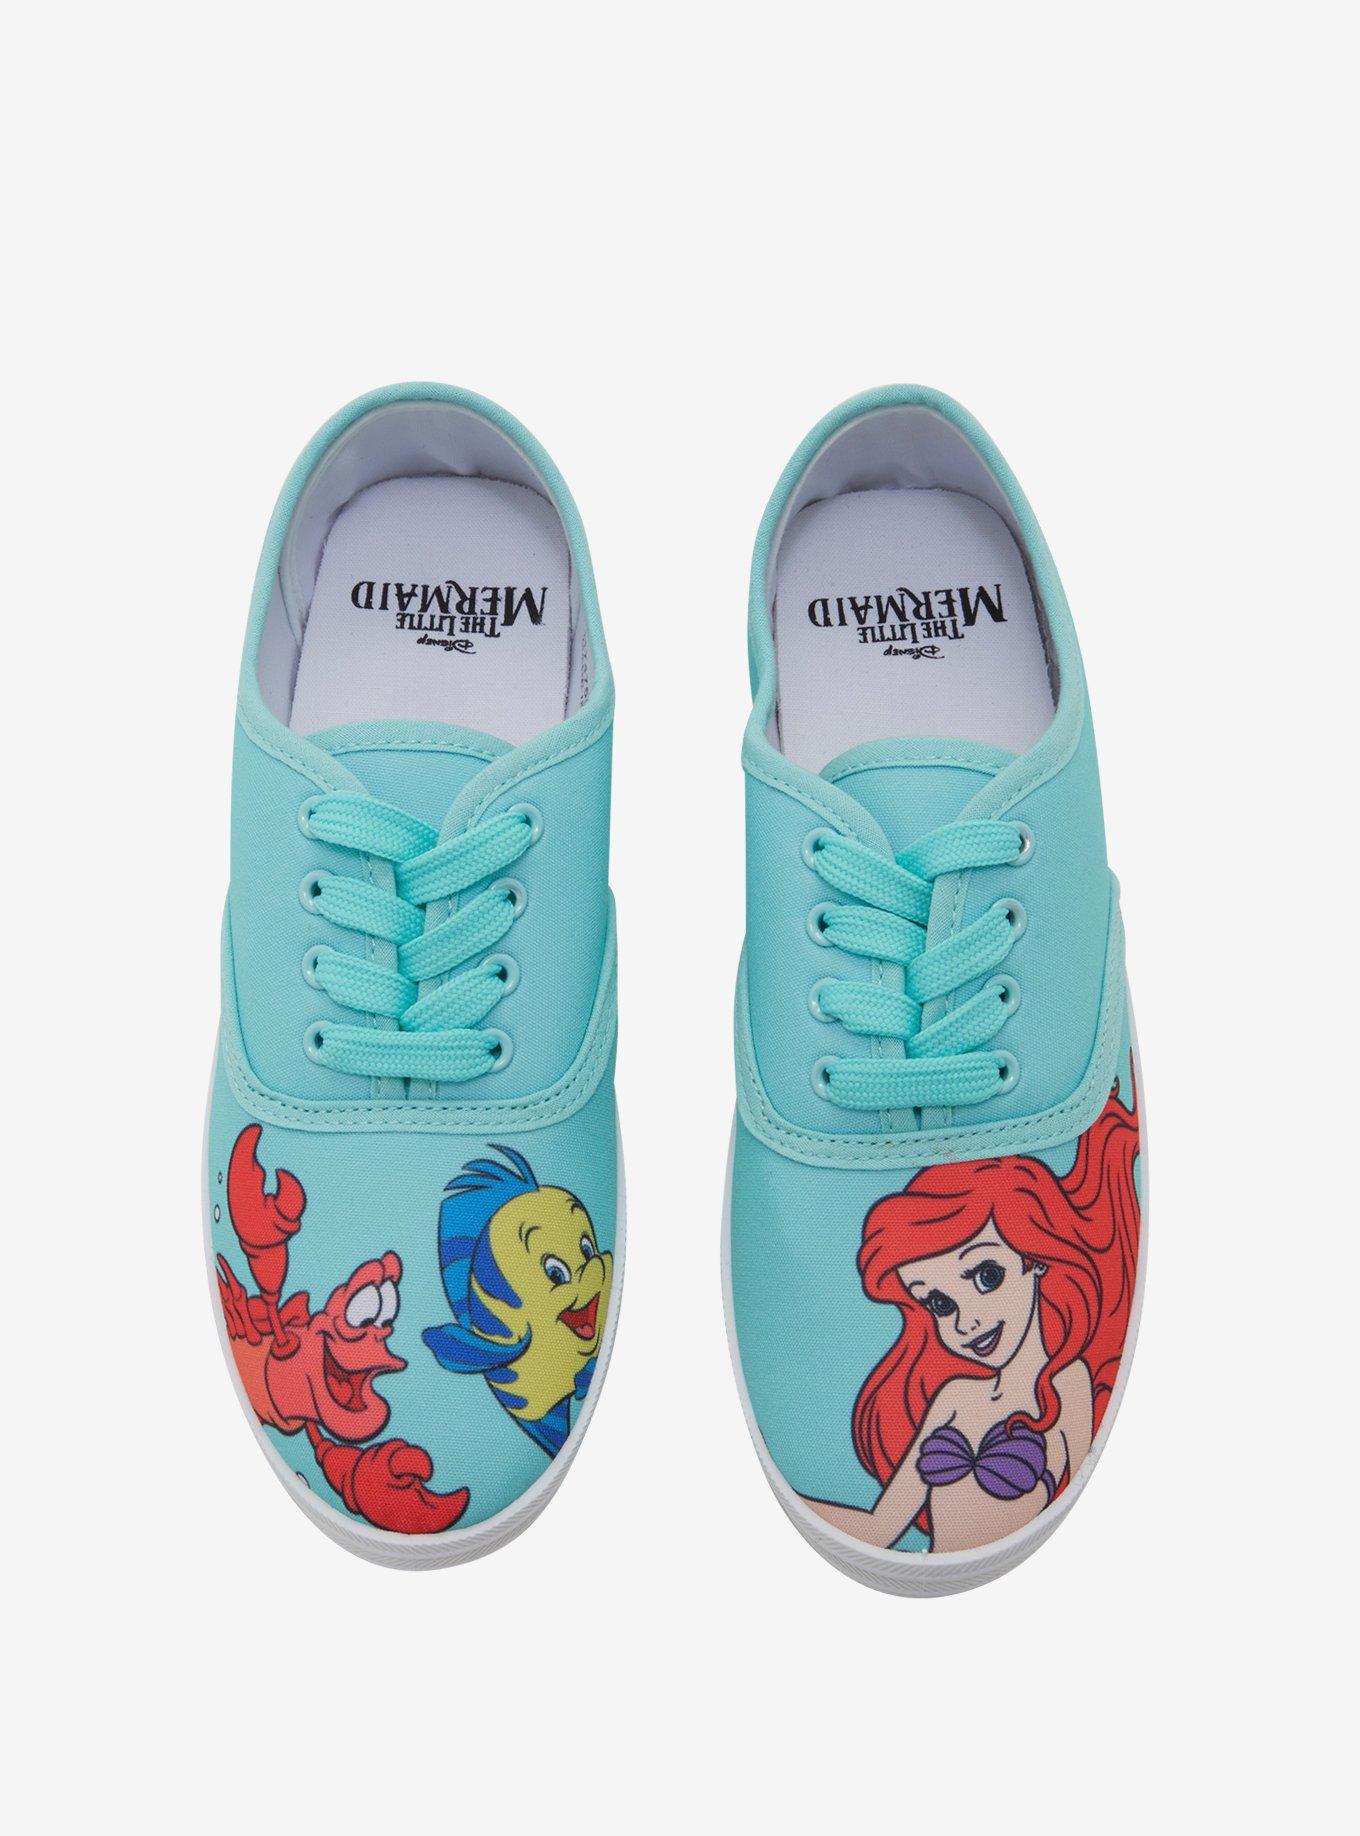 Disney The Little Mermaid Ariel Lace-Up | Sneakers Topic Hot